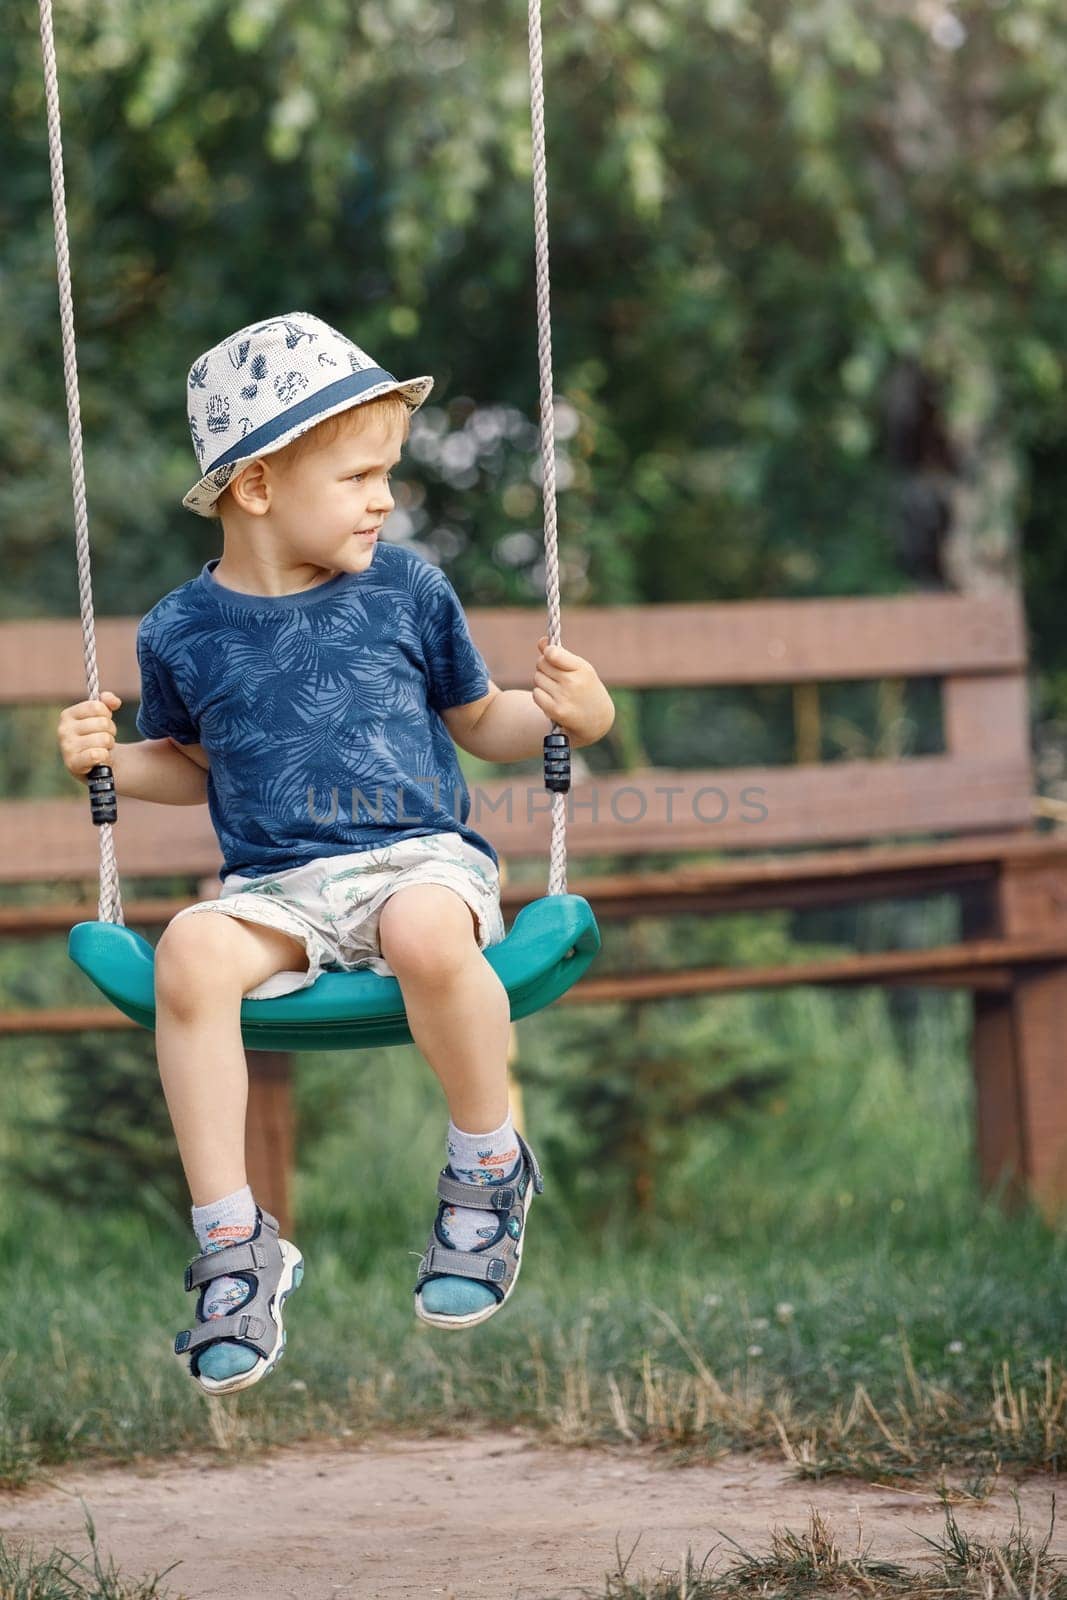 Little child blond boy having fun on a swing outdoor. Summer playground. Child swinging carefully and looks to distance.